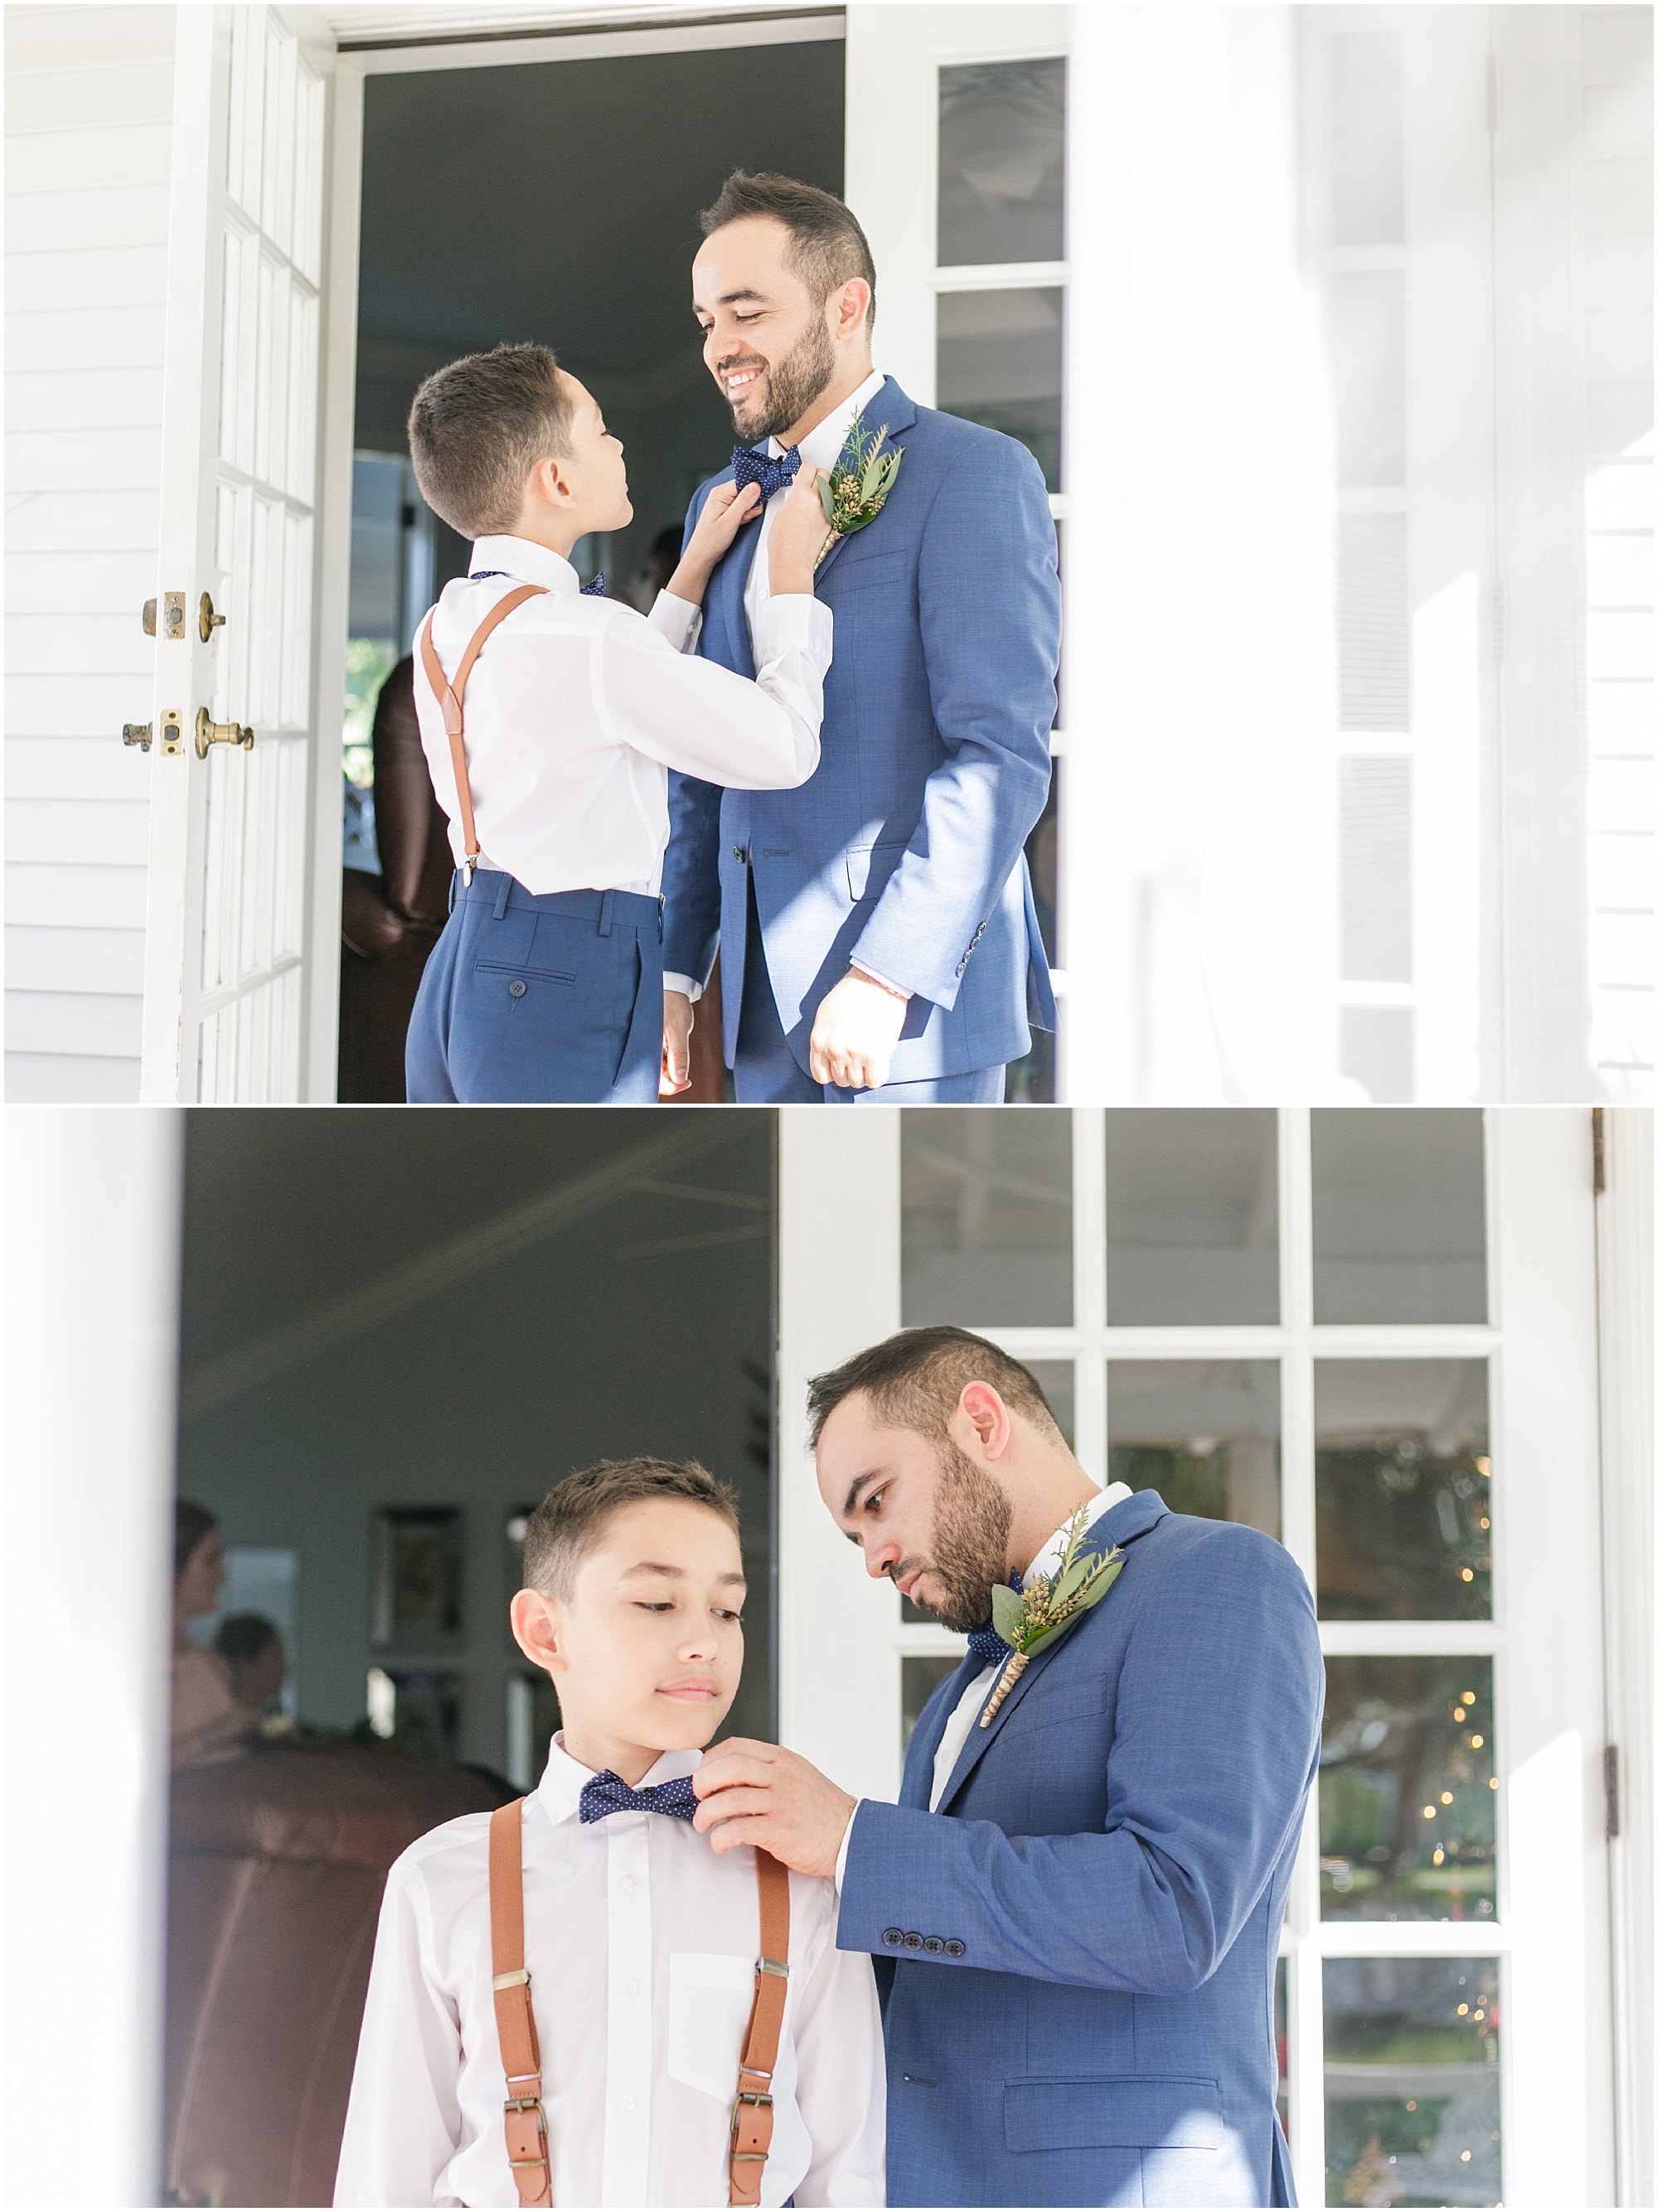 Dad and son getting ready for wedding